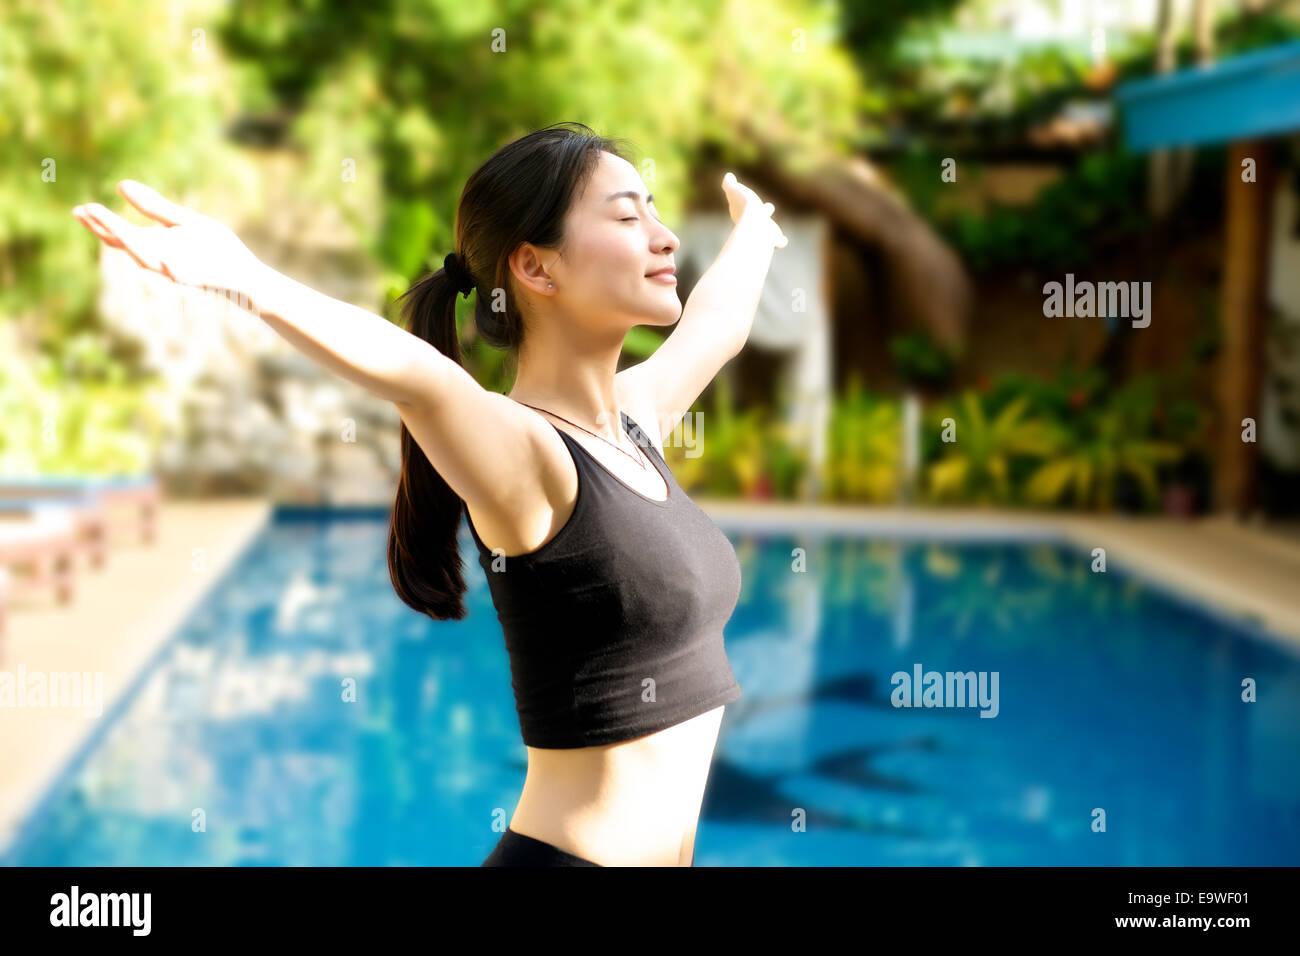 Asian Girl open arms in fitness outfit relaxing at pool Stock Photo